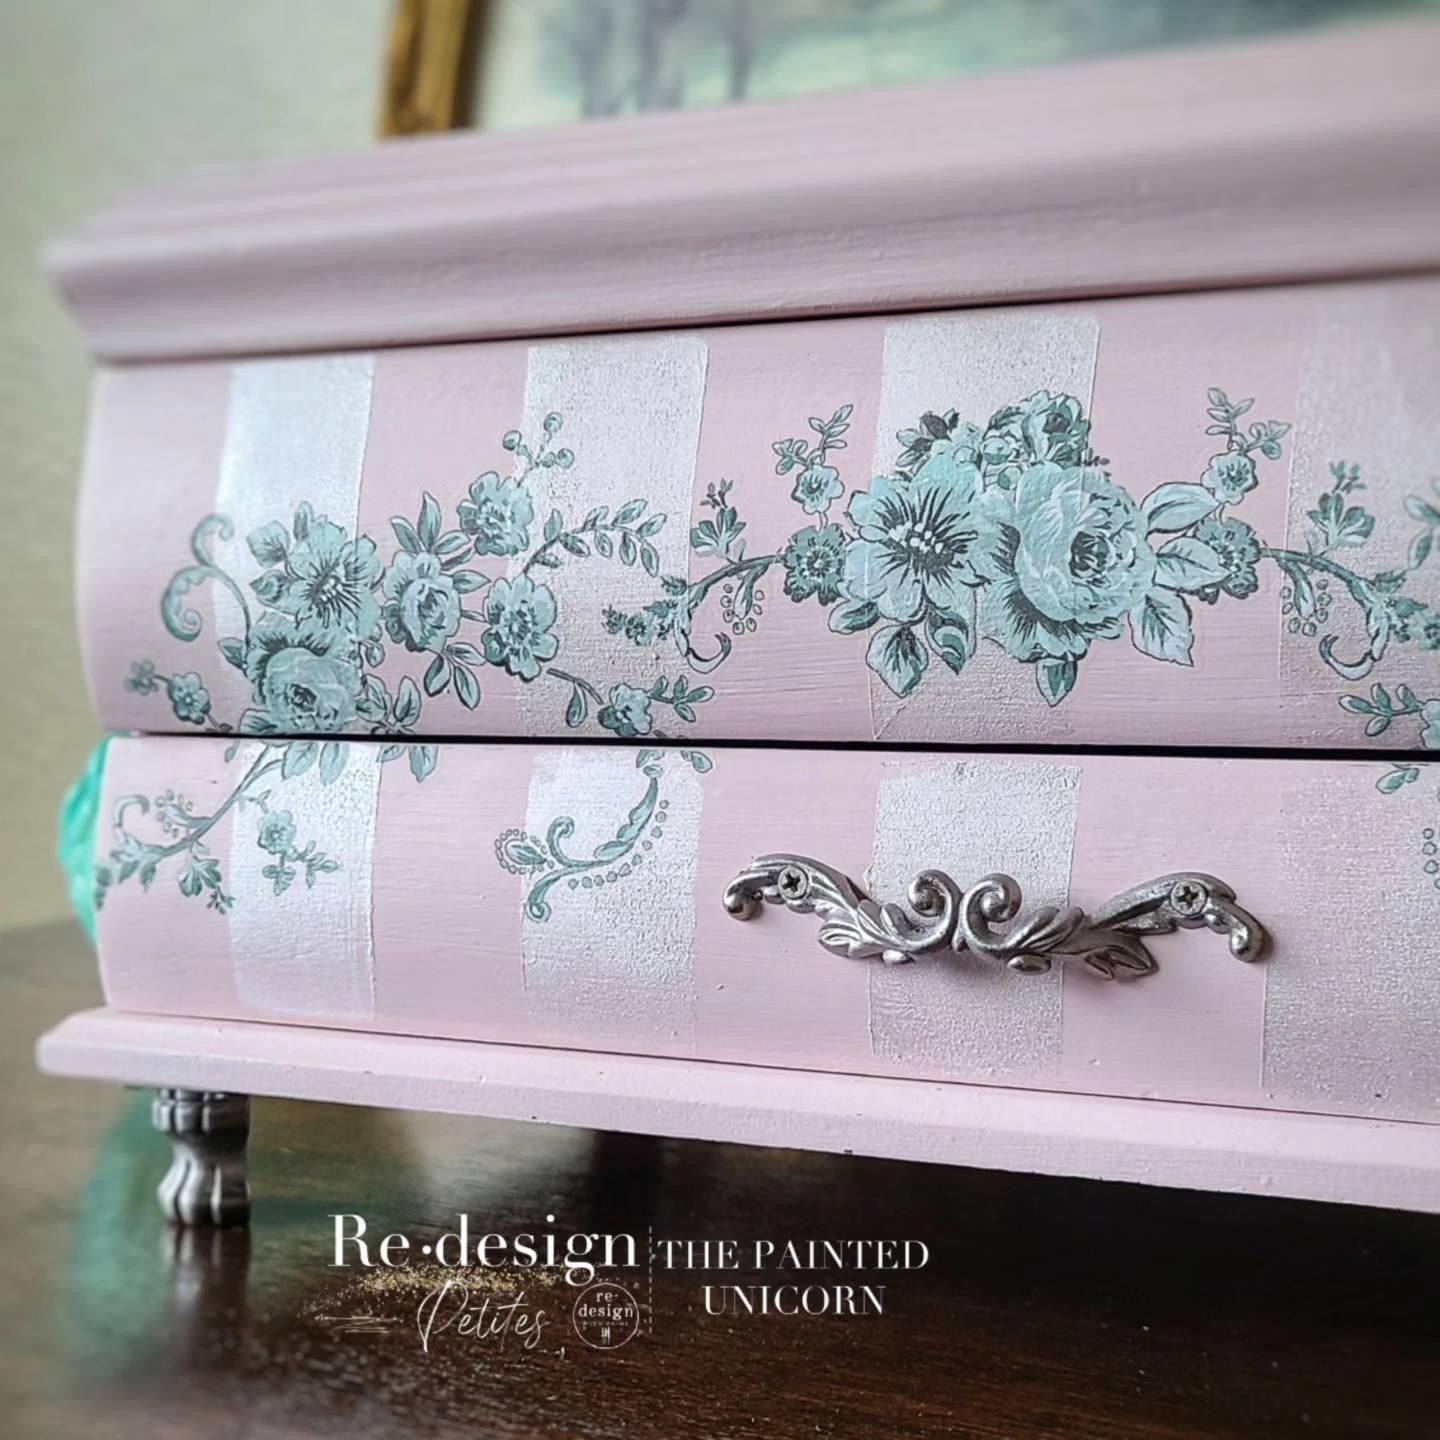 Redesign Decor transfer-Minty Roses-NEW MAXI SIZE